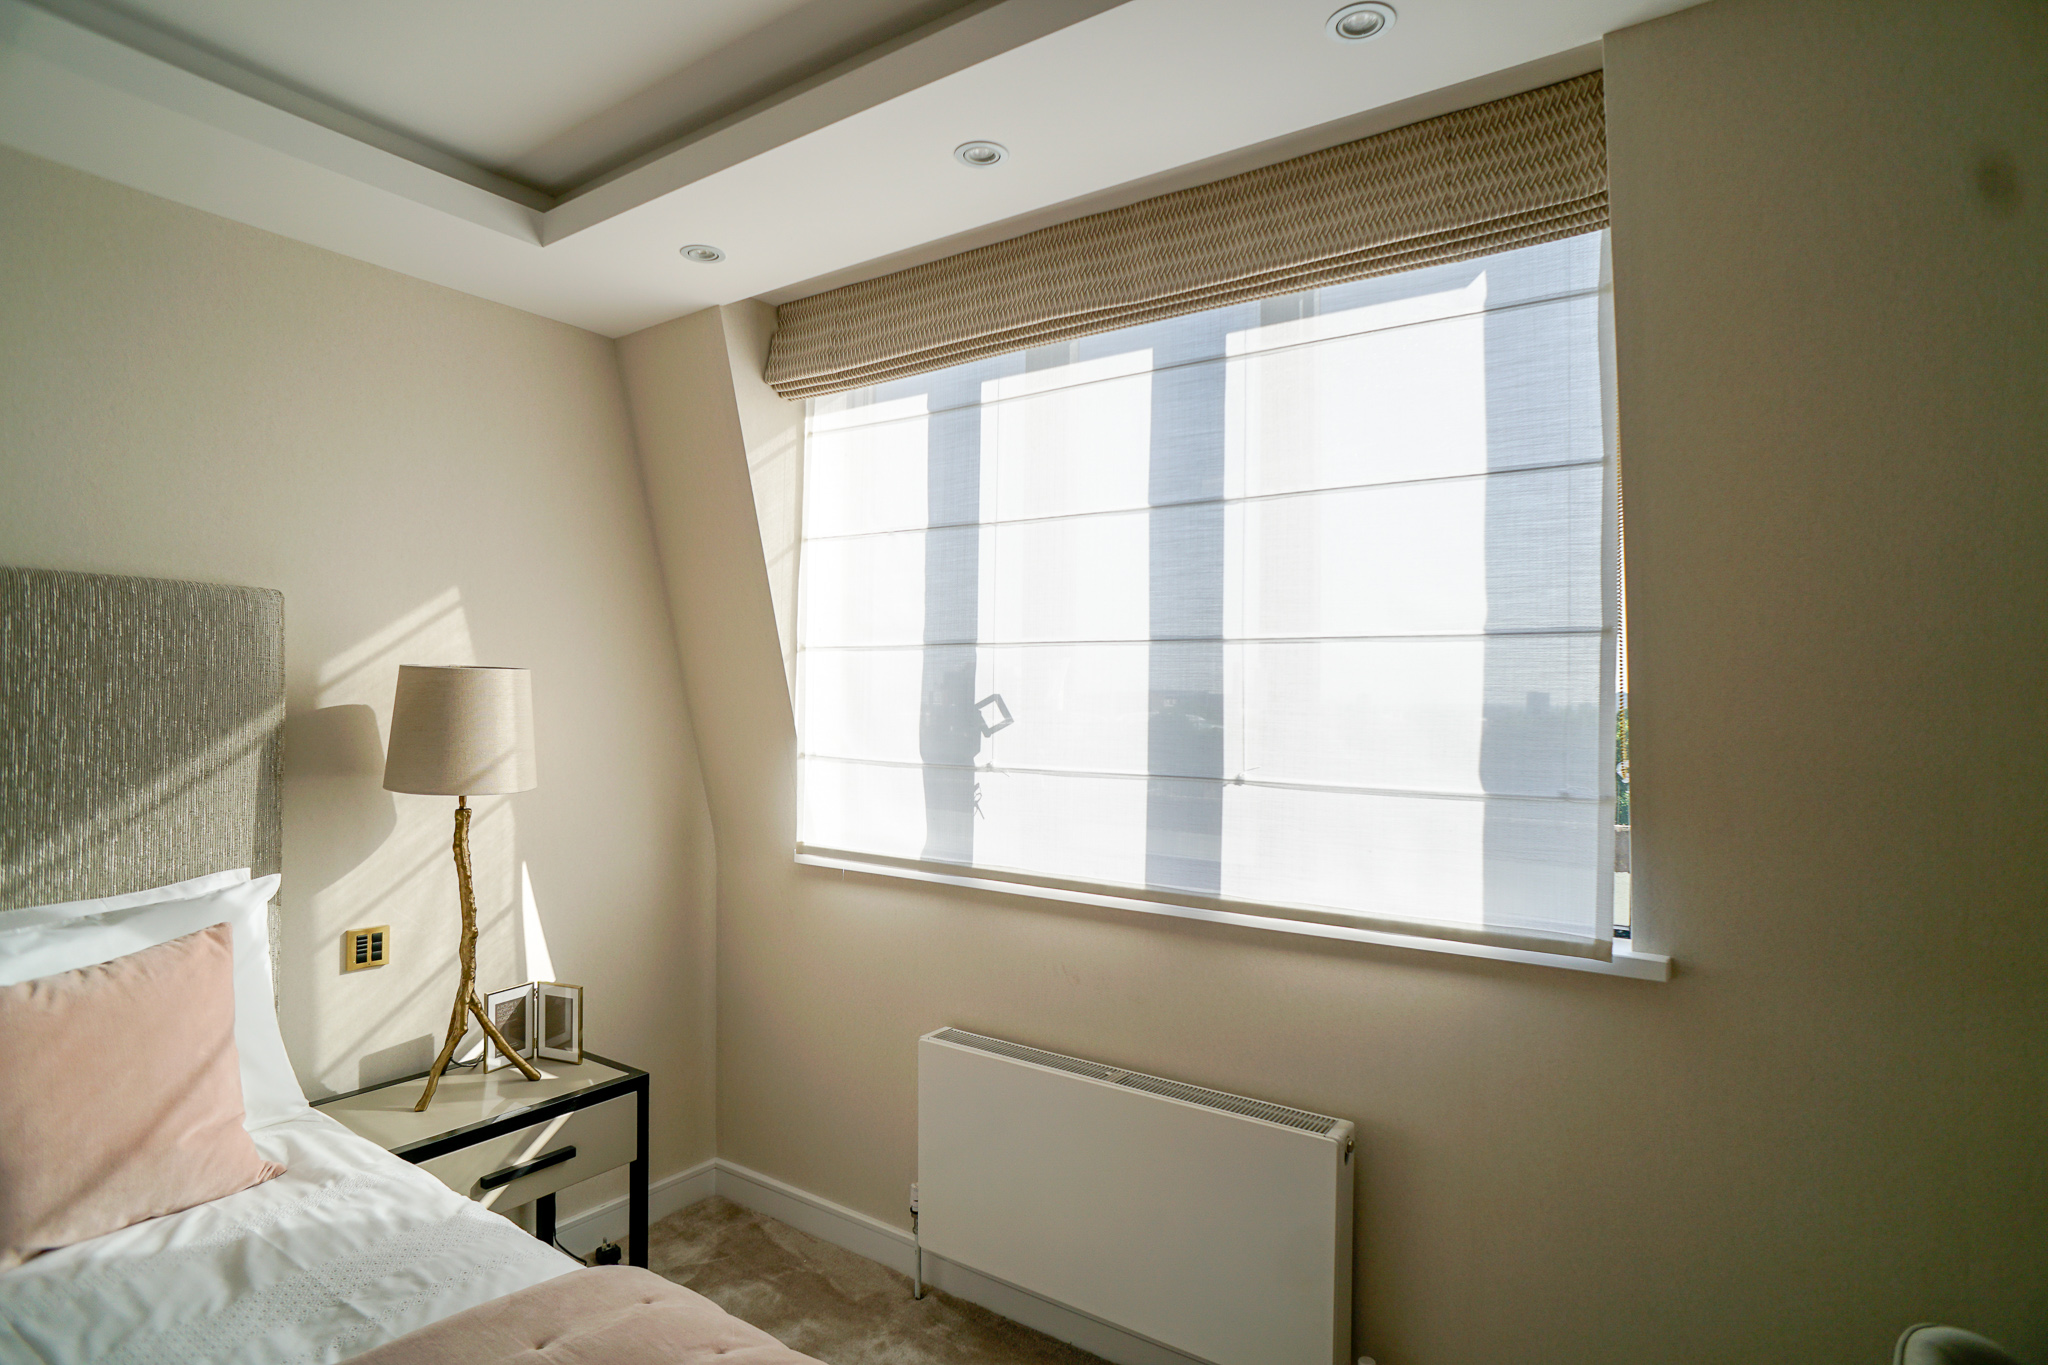 Bedroom Electronic Roman Blind and Sheer Roman